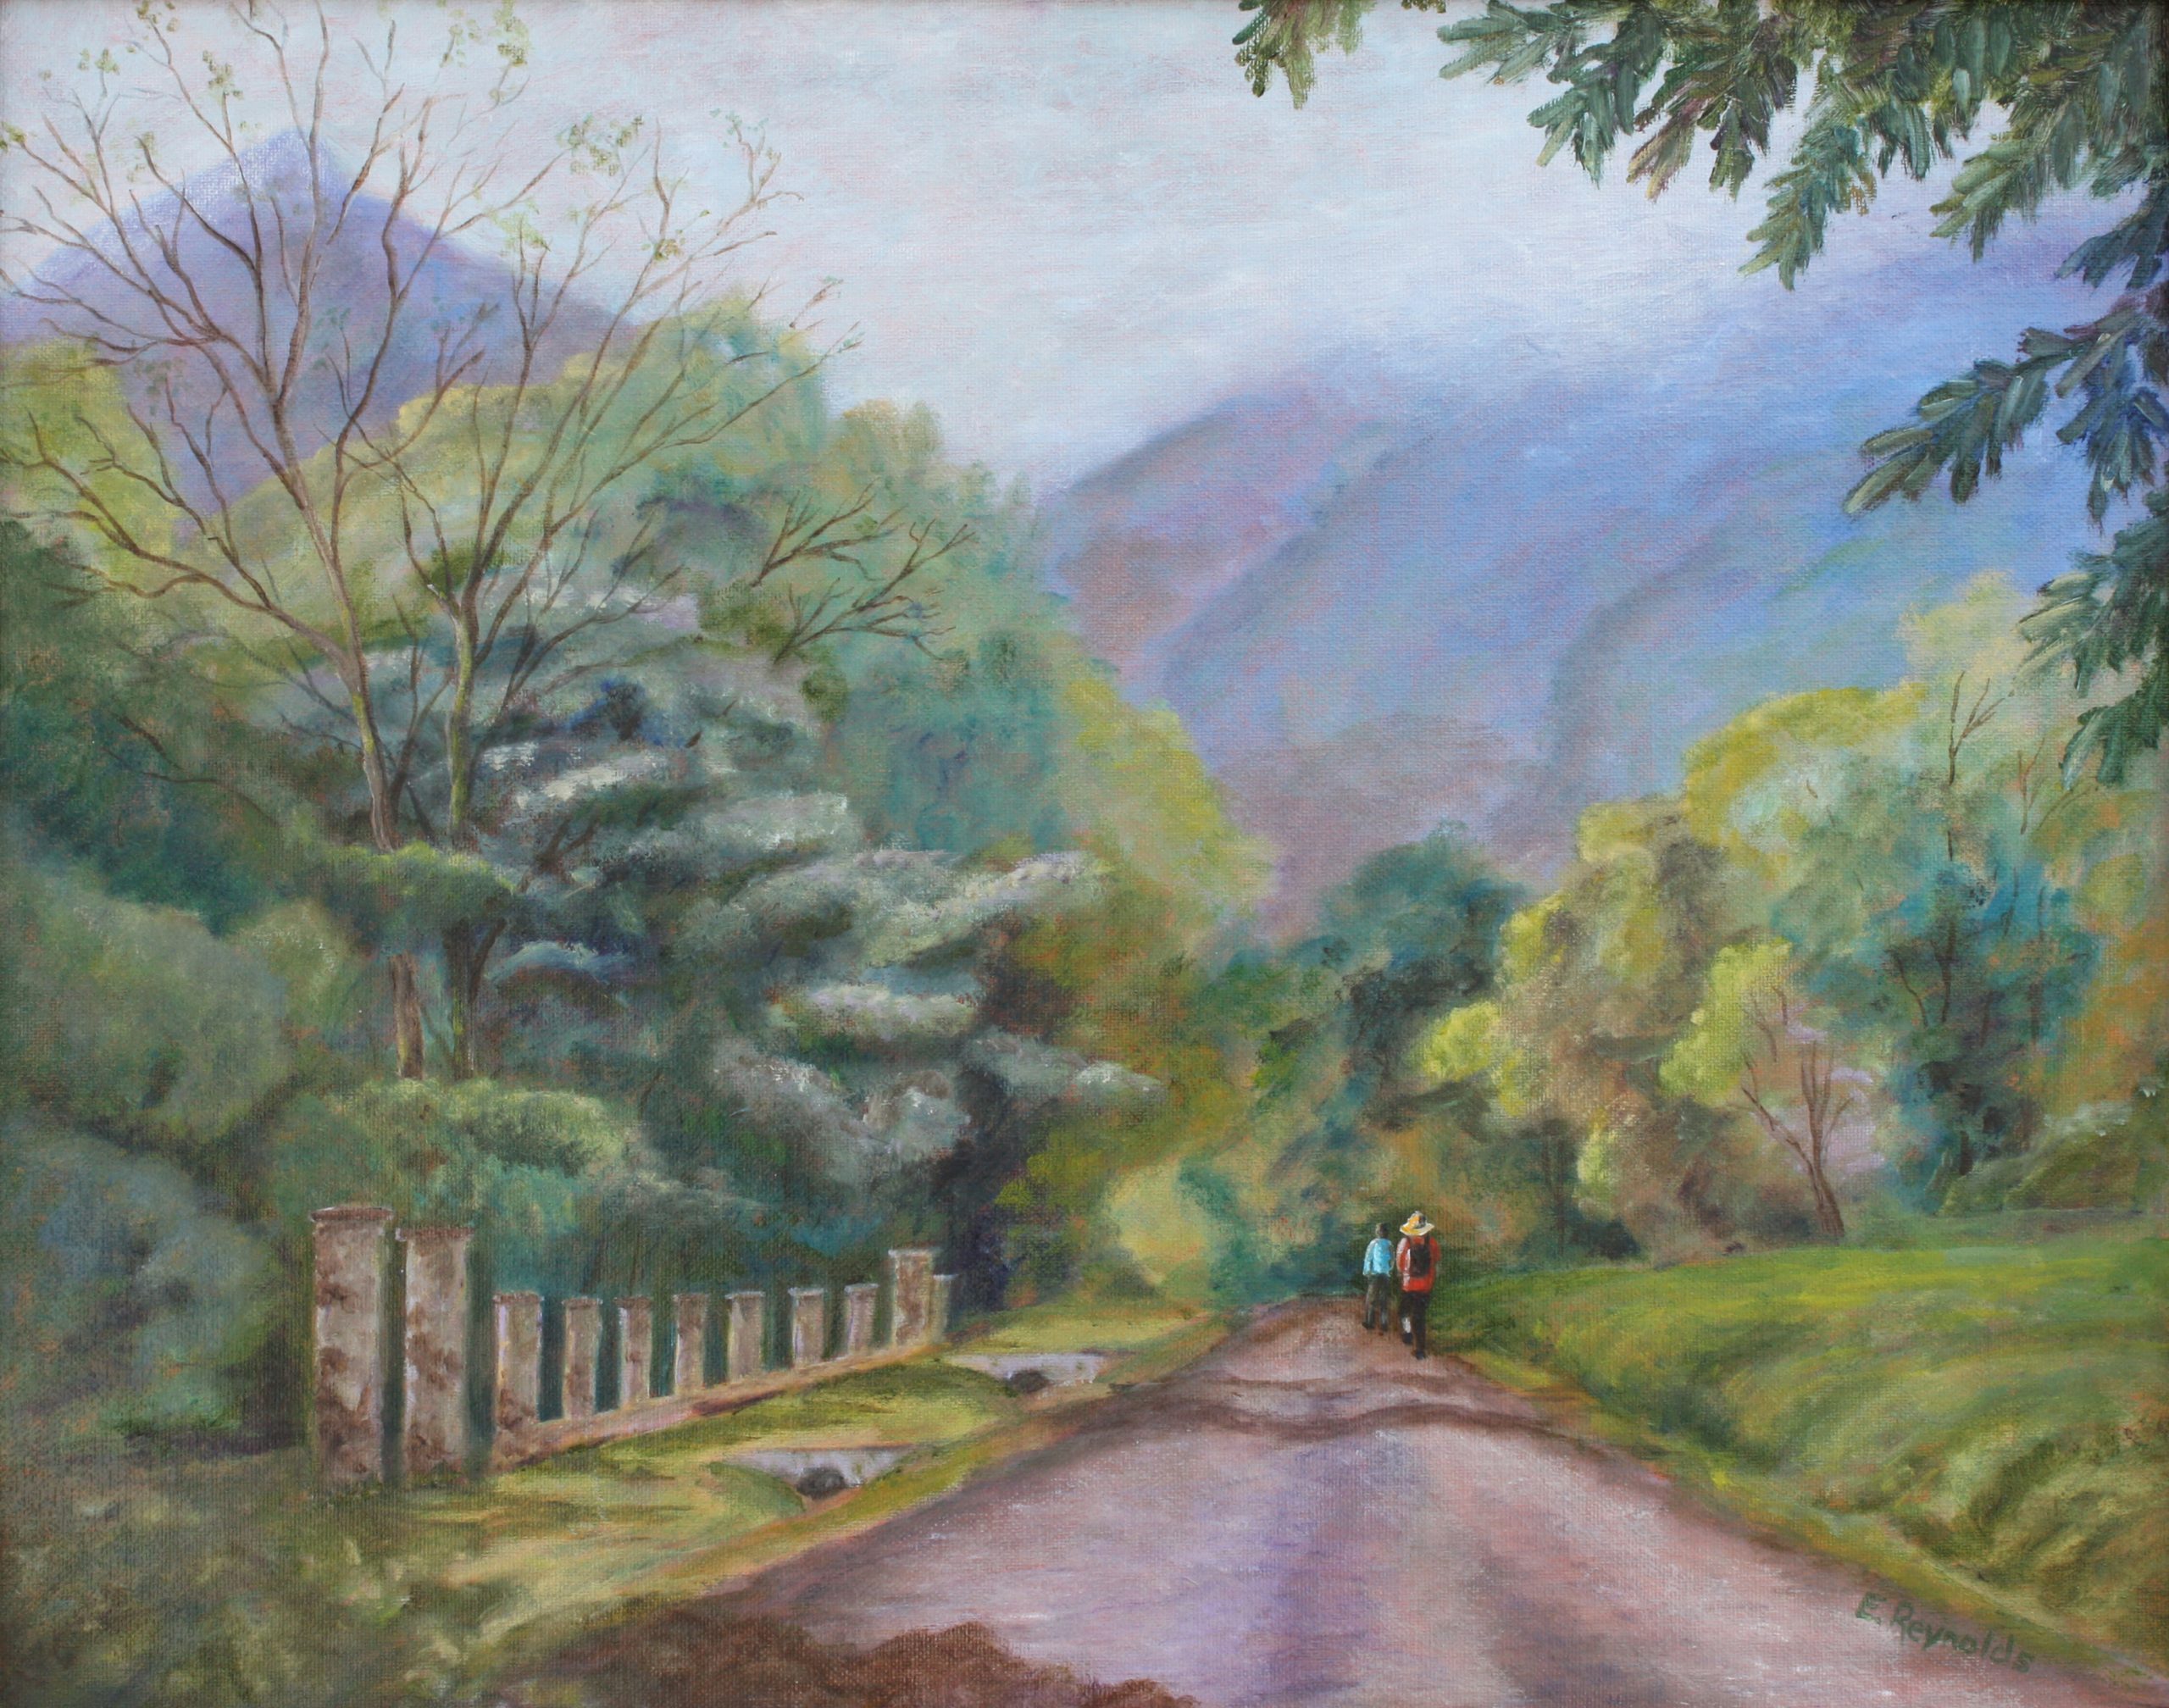 A landscape of a road with two people walking on it in the distance with mountains in the background.